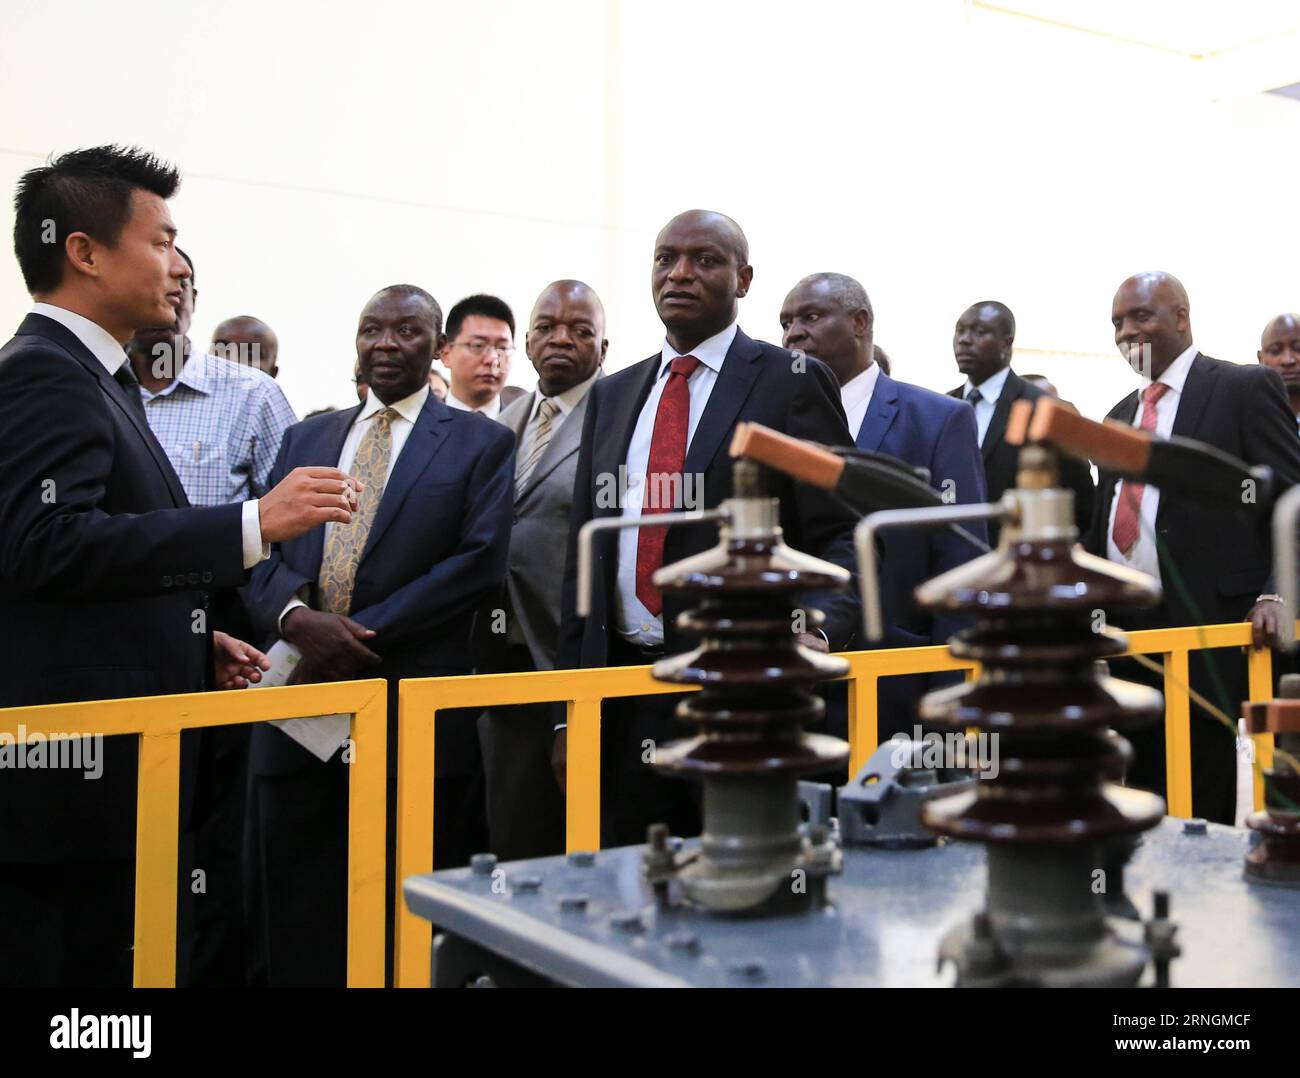 (161006) -- NAIROBI, Oct. 6, 2016 -- Charles Keter (C), Kenya s Cabinet Secretary for Energy and Petroleum, visits Yocean manufacturing transformers factory on the outskirts of Nairobi, Kenya, on Oct. 5, 2016. Kenya s first transfomer-manufacturing plant, set up by Chinese company Yocean Group, opened on Wednesday. Kenya has been relying on transformers from abroad, mostly from India. Kenya s Cabinet Secretary for Energy and Petroleum, Charles Keter, said the plant will ease procurement of transformers and other electrical appliances.) (dtf) KENYA-NAIROBI-ENERGY-CHINA-TRANSFORMER PanxSiwei PUB Stock Photo